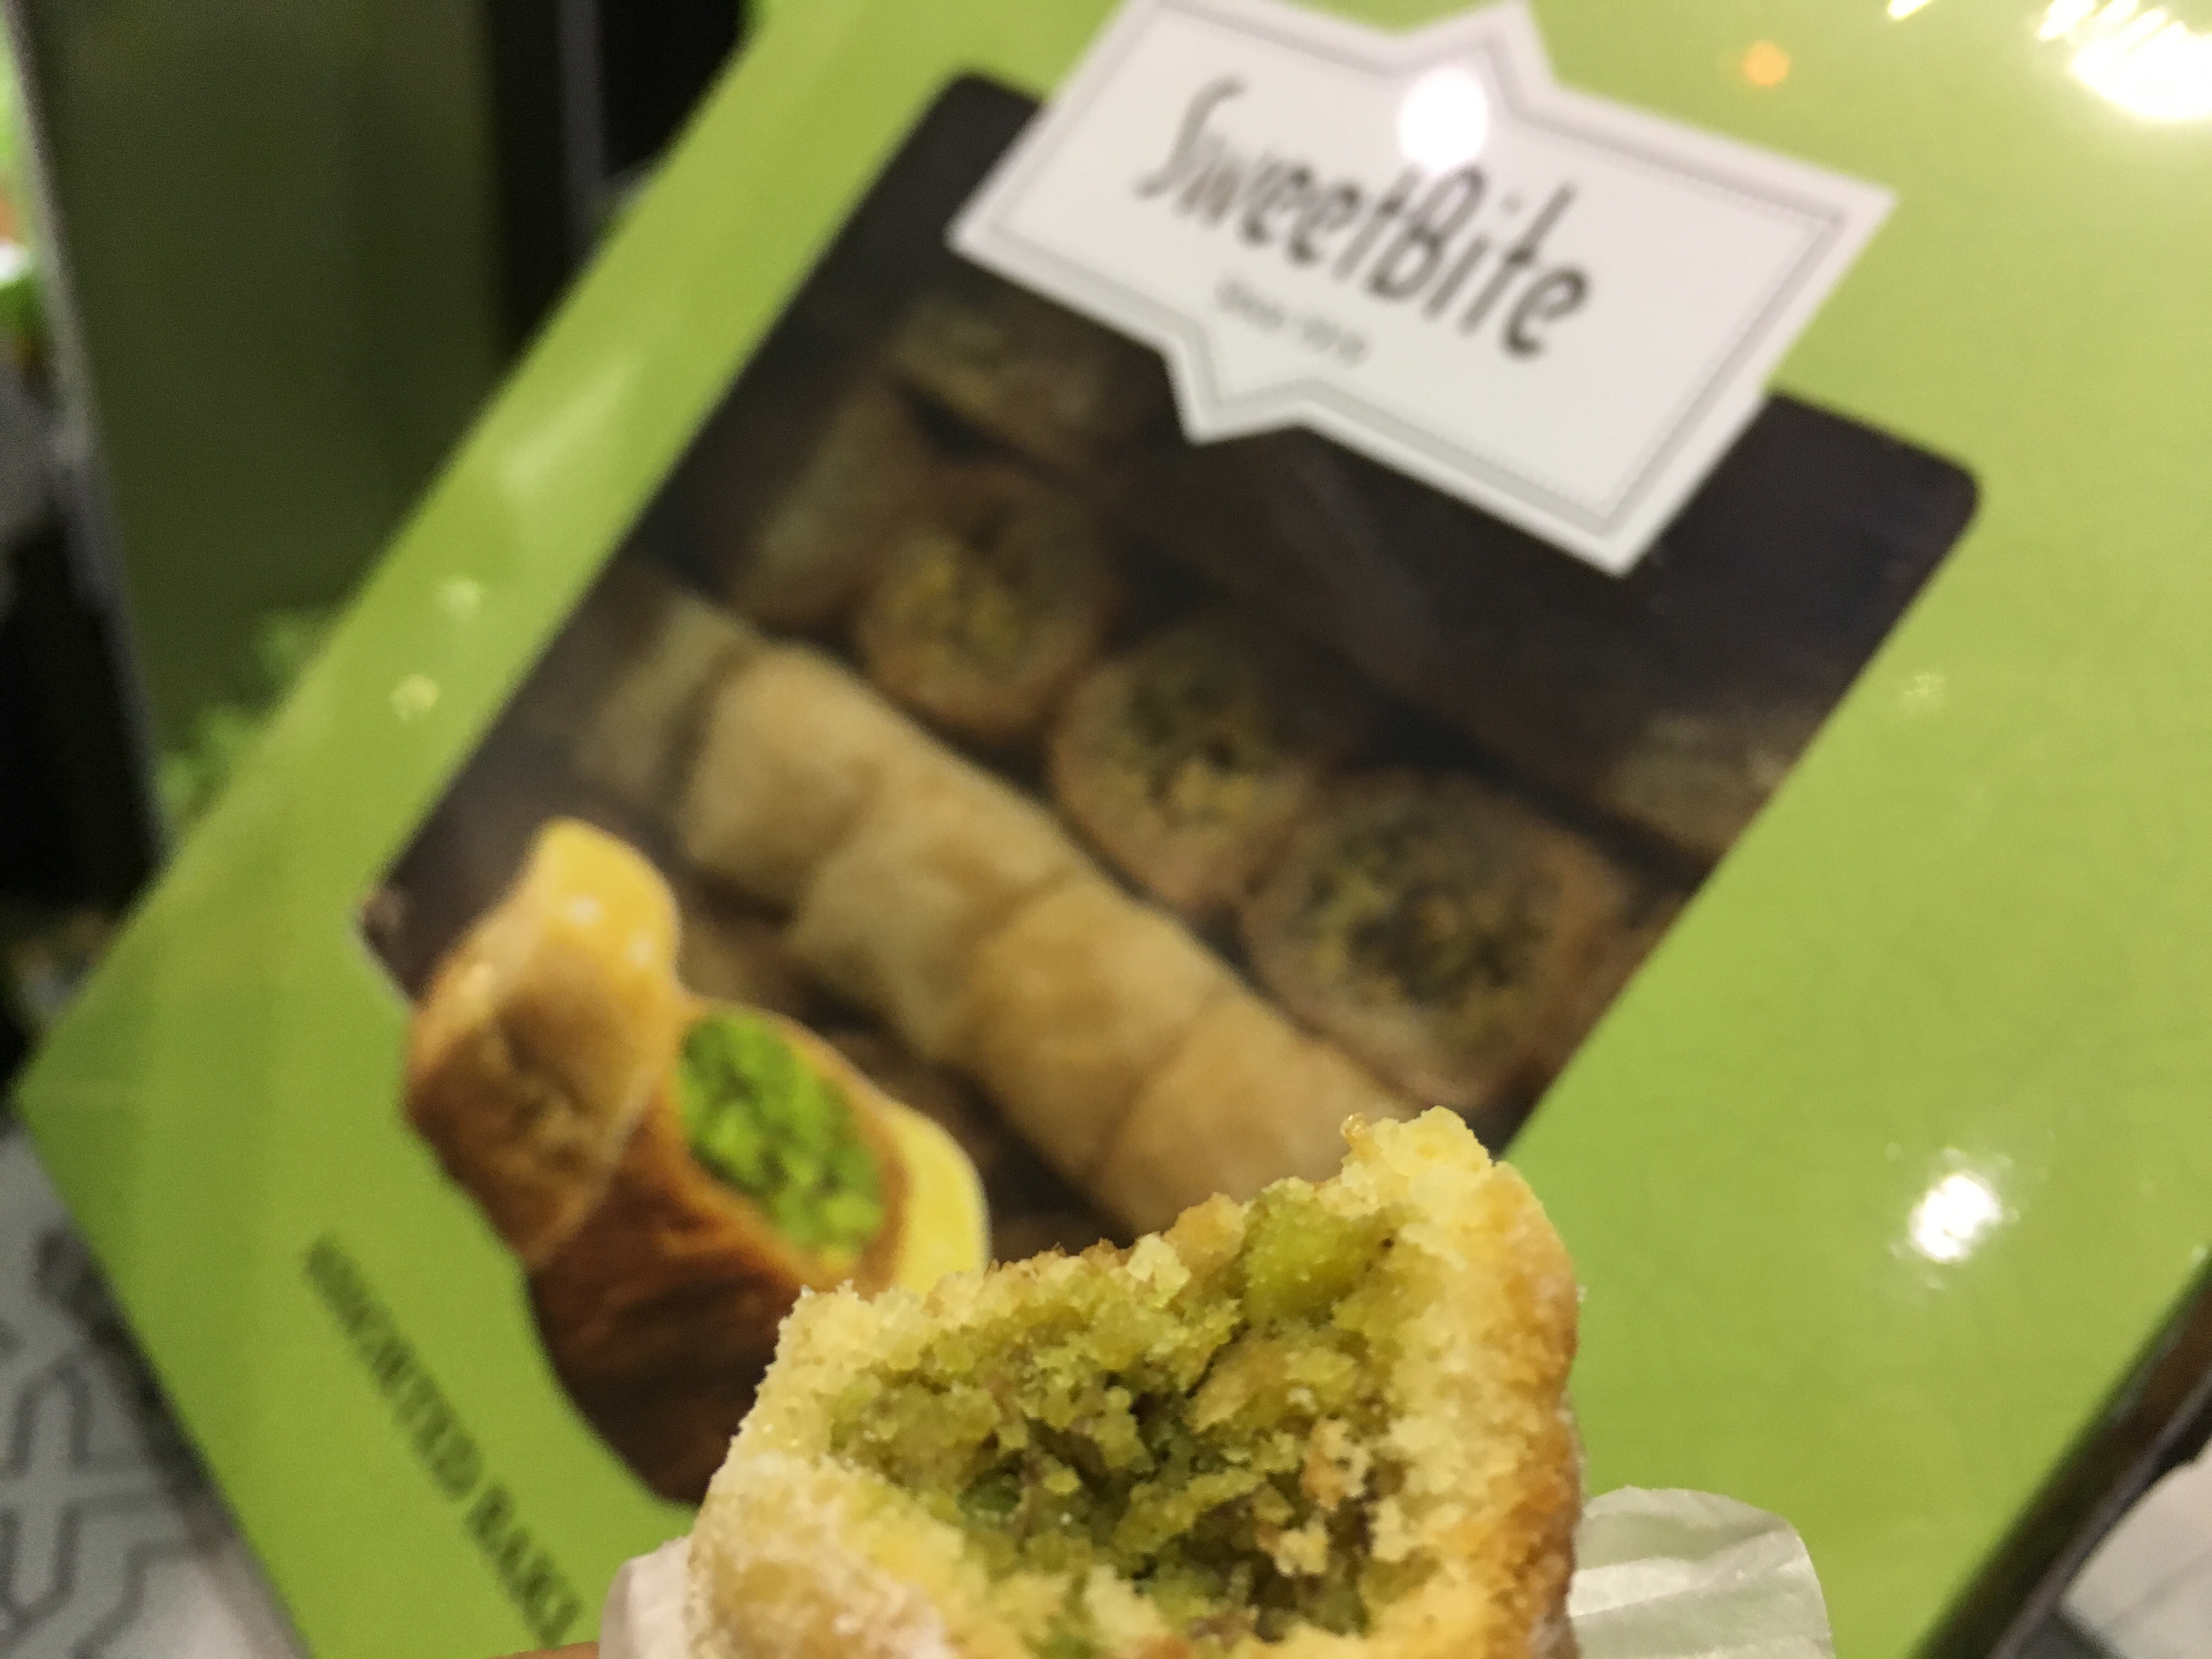 Amazing Middle eastern pastries packaged for grocery